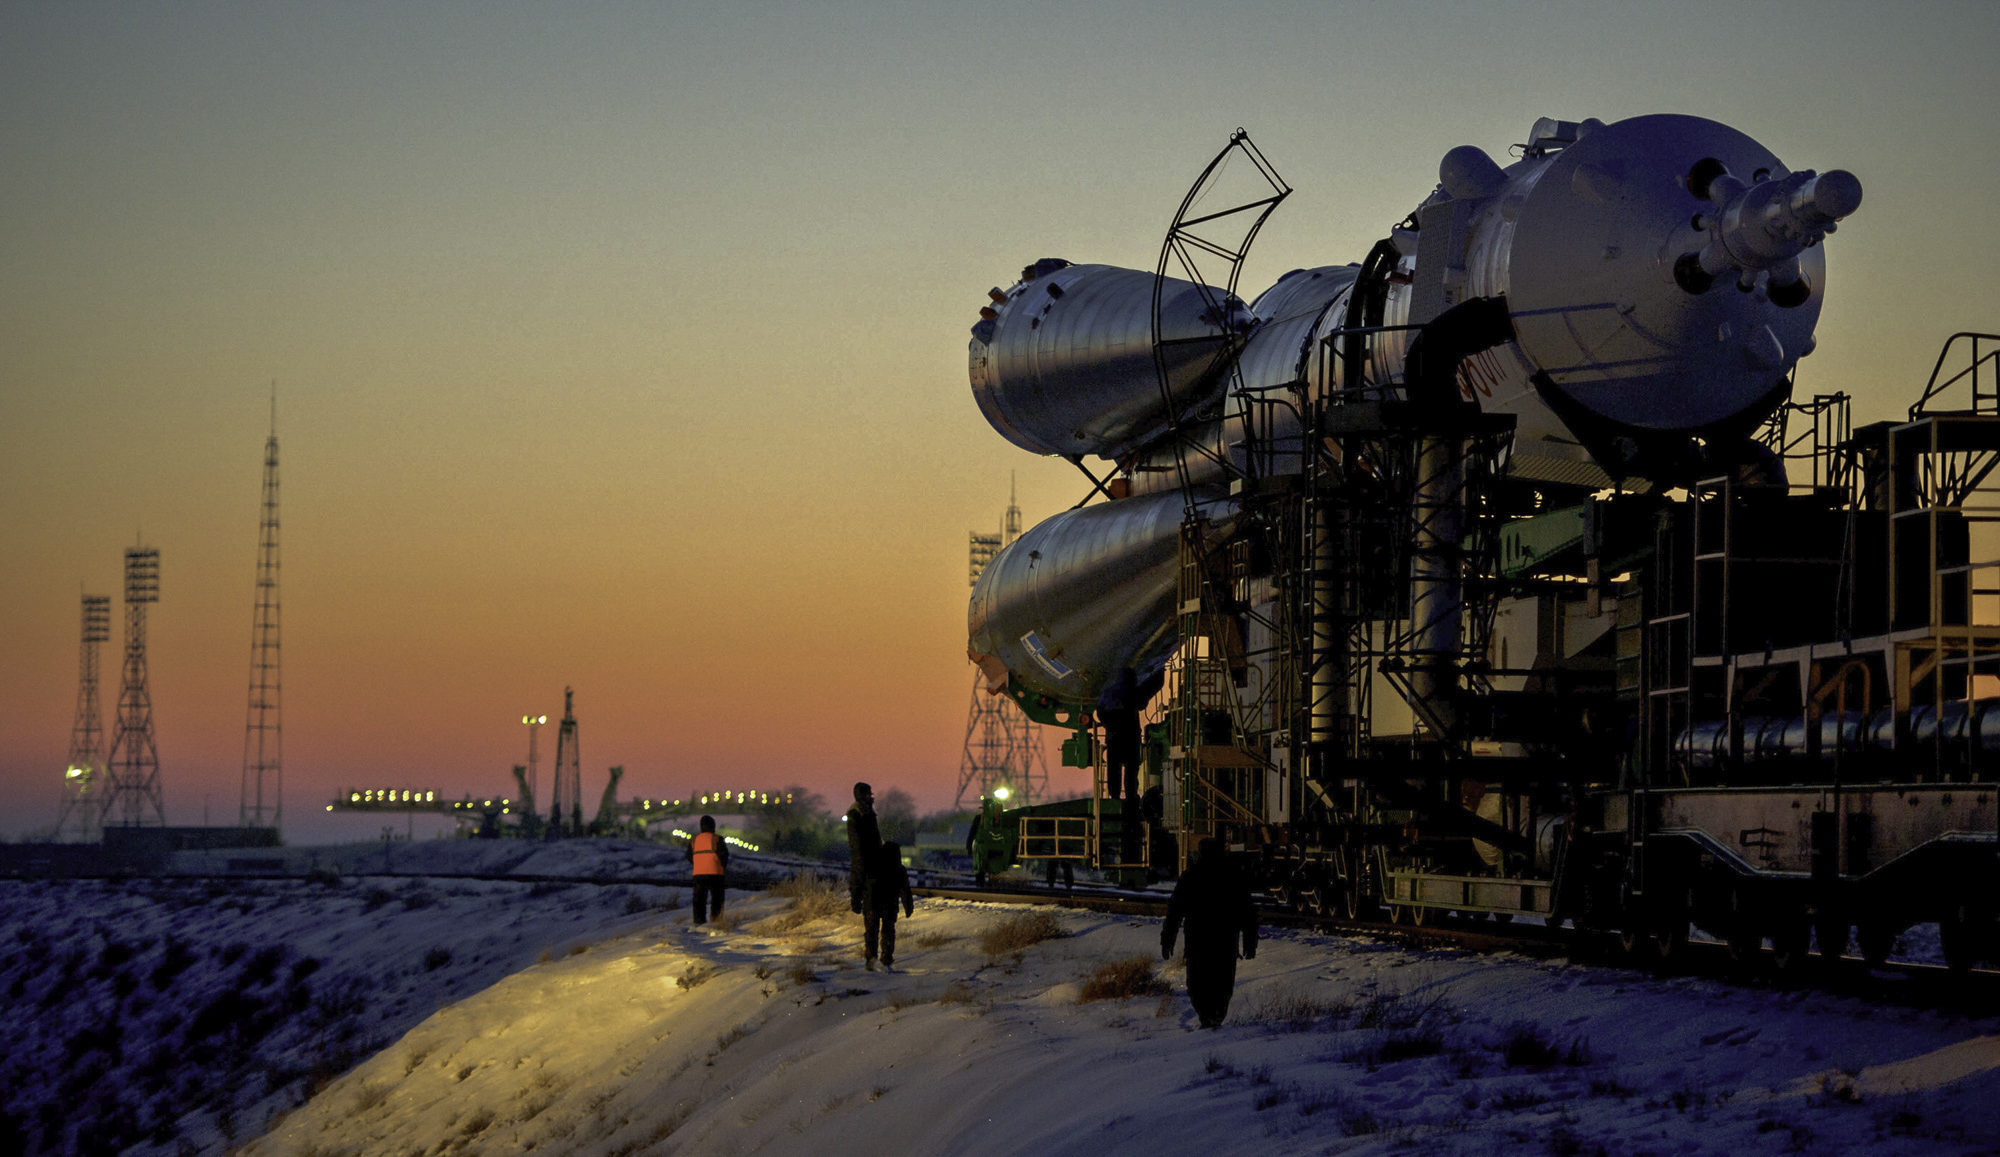  The Soyuz TMA-03M spacecraft is rolled out by train on its way to the launch pad at the Baikonur Cosmodrome, Kazakhstan, Monday, Dec. 19, 2011. The launch of the Soyuz spacecraft with Expedition 30 Soyuz Commander Oleg Kononenko of Russia, NASA Flig